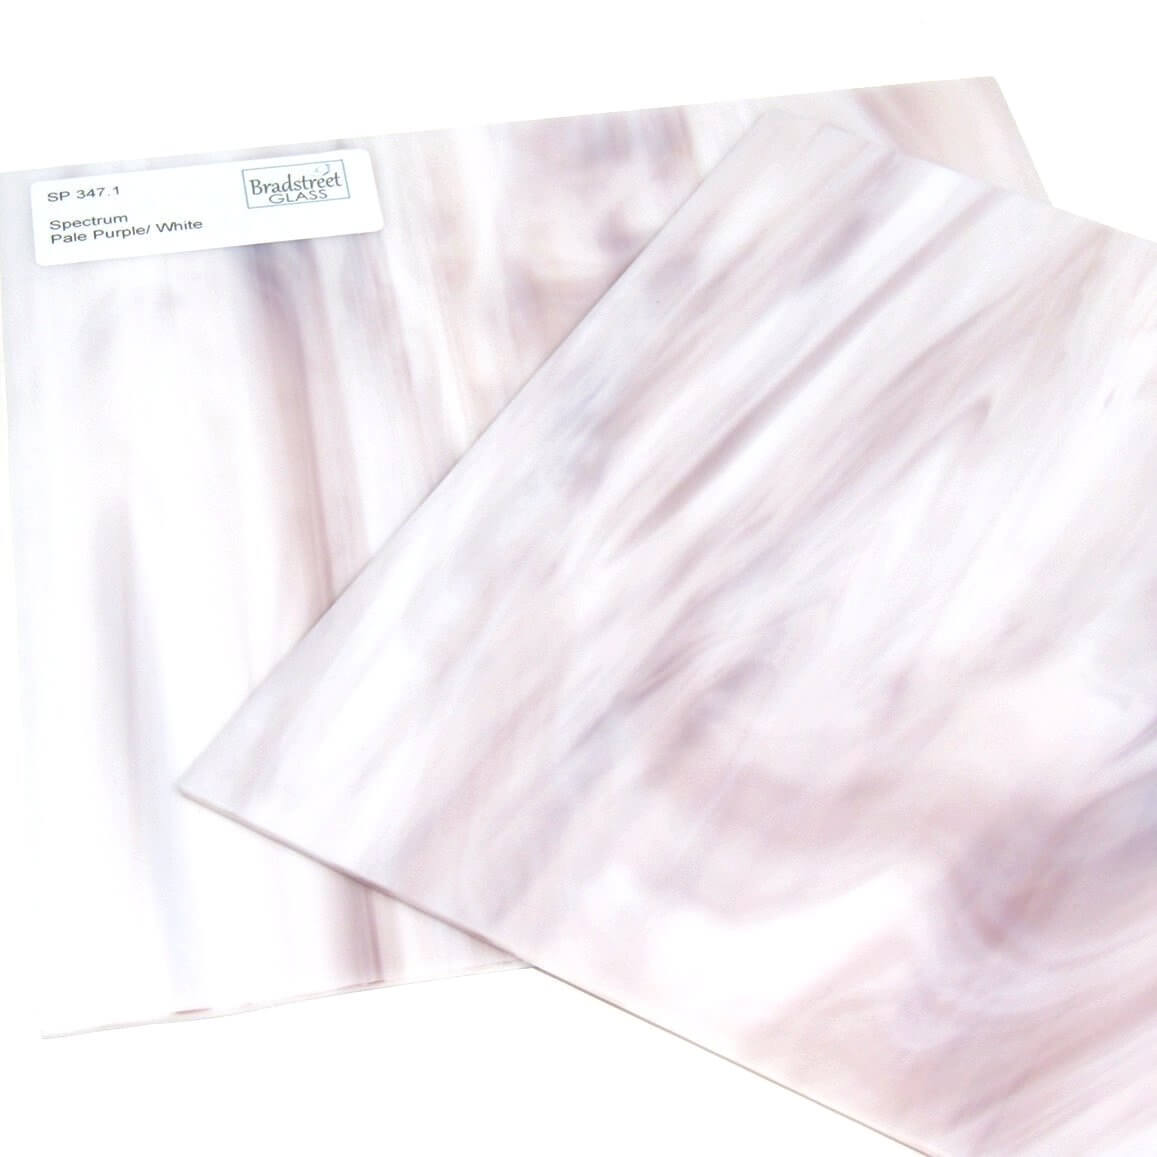 Spectrum SP 347.1 Stained Glass Sheet Streaky Pale Purple and White Opal